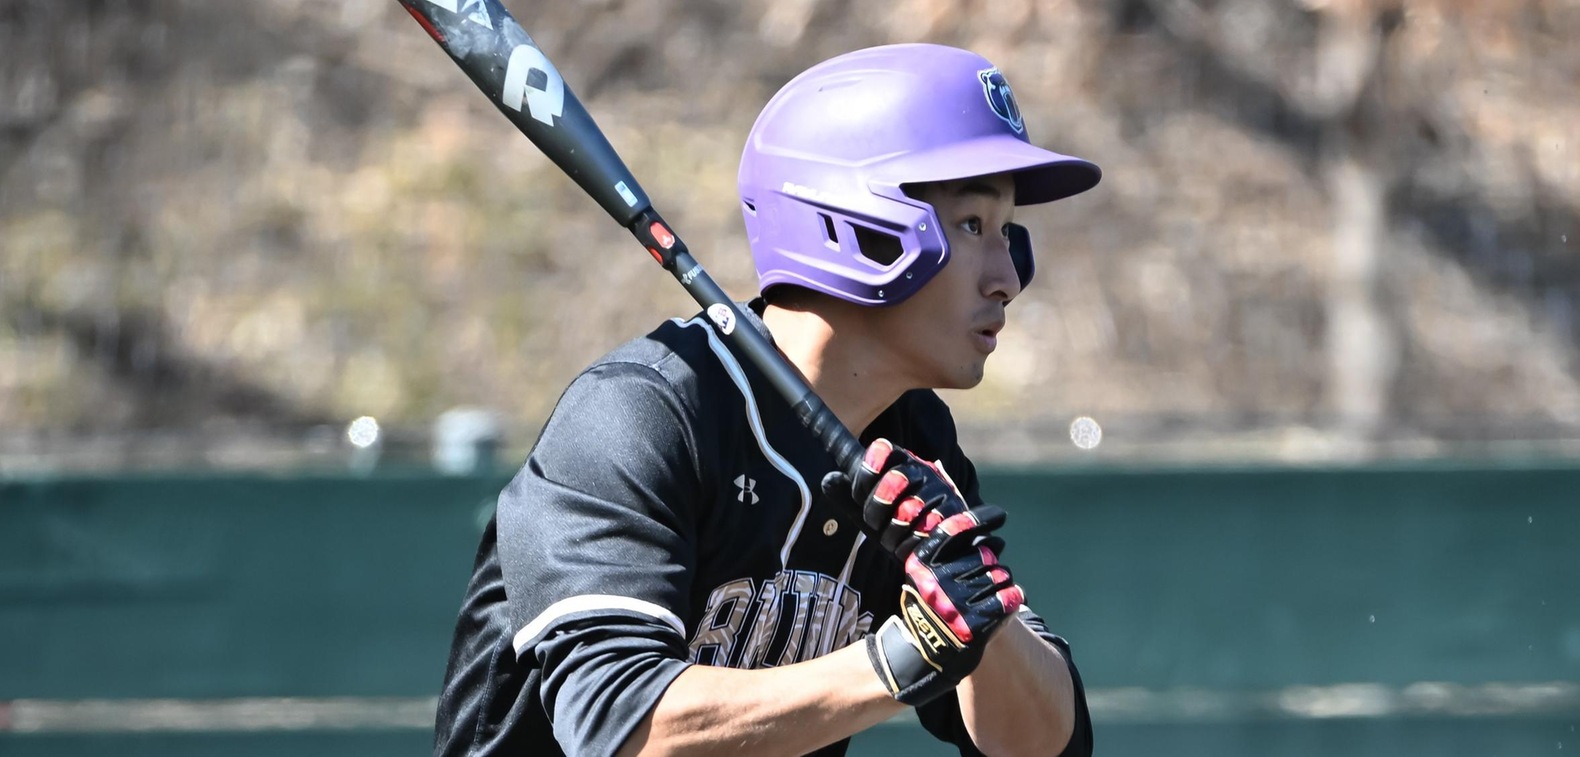 Kanta Kobayashi went 7-for-11 with three extra-base hits and eight runs scored in the double-header sweep.